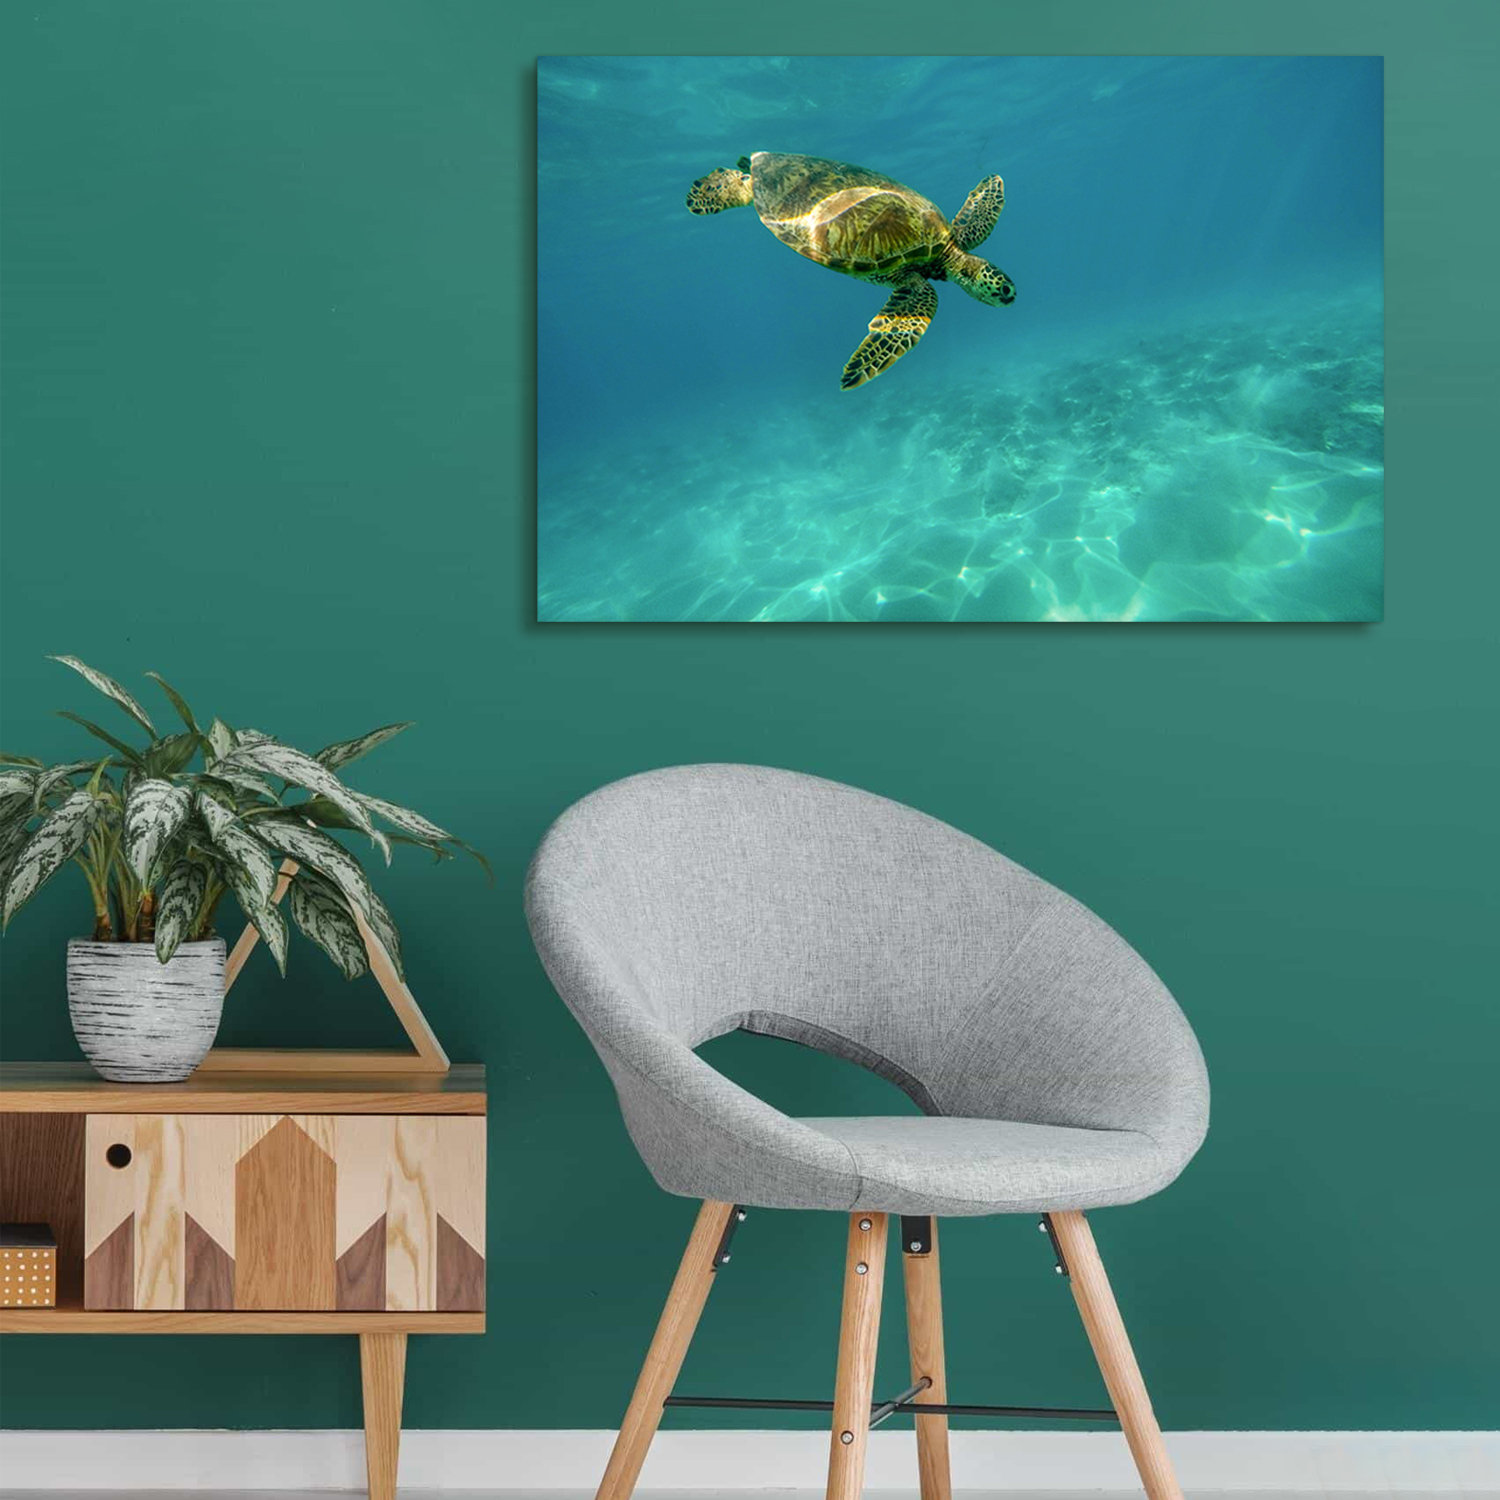 Framed Canvas Sea Turtle Wall Art Decor Painting,Decoration for Office,Dining Room,Living Room, Bathroom, Bedroom Decor-Ready to Hang On Canvas Photog